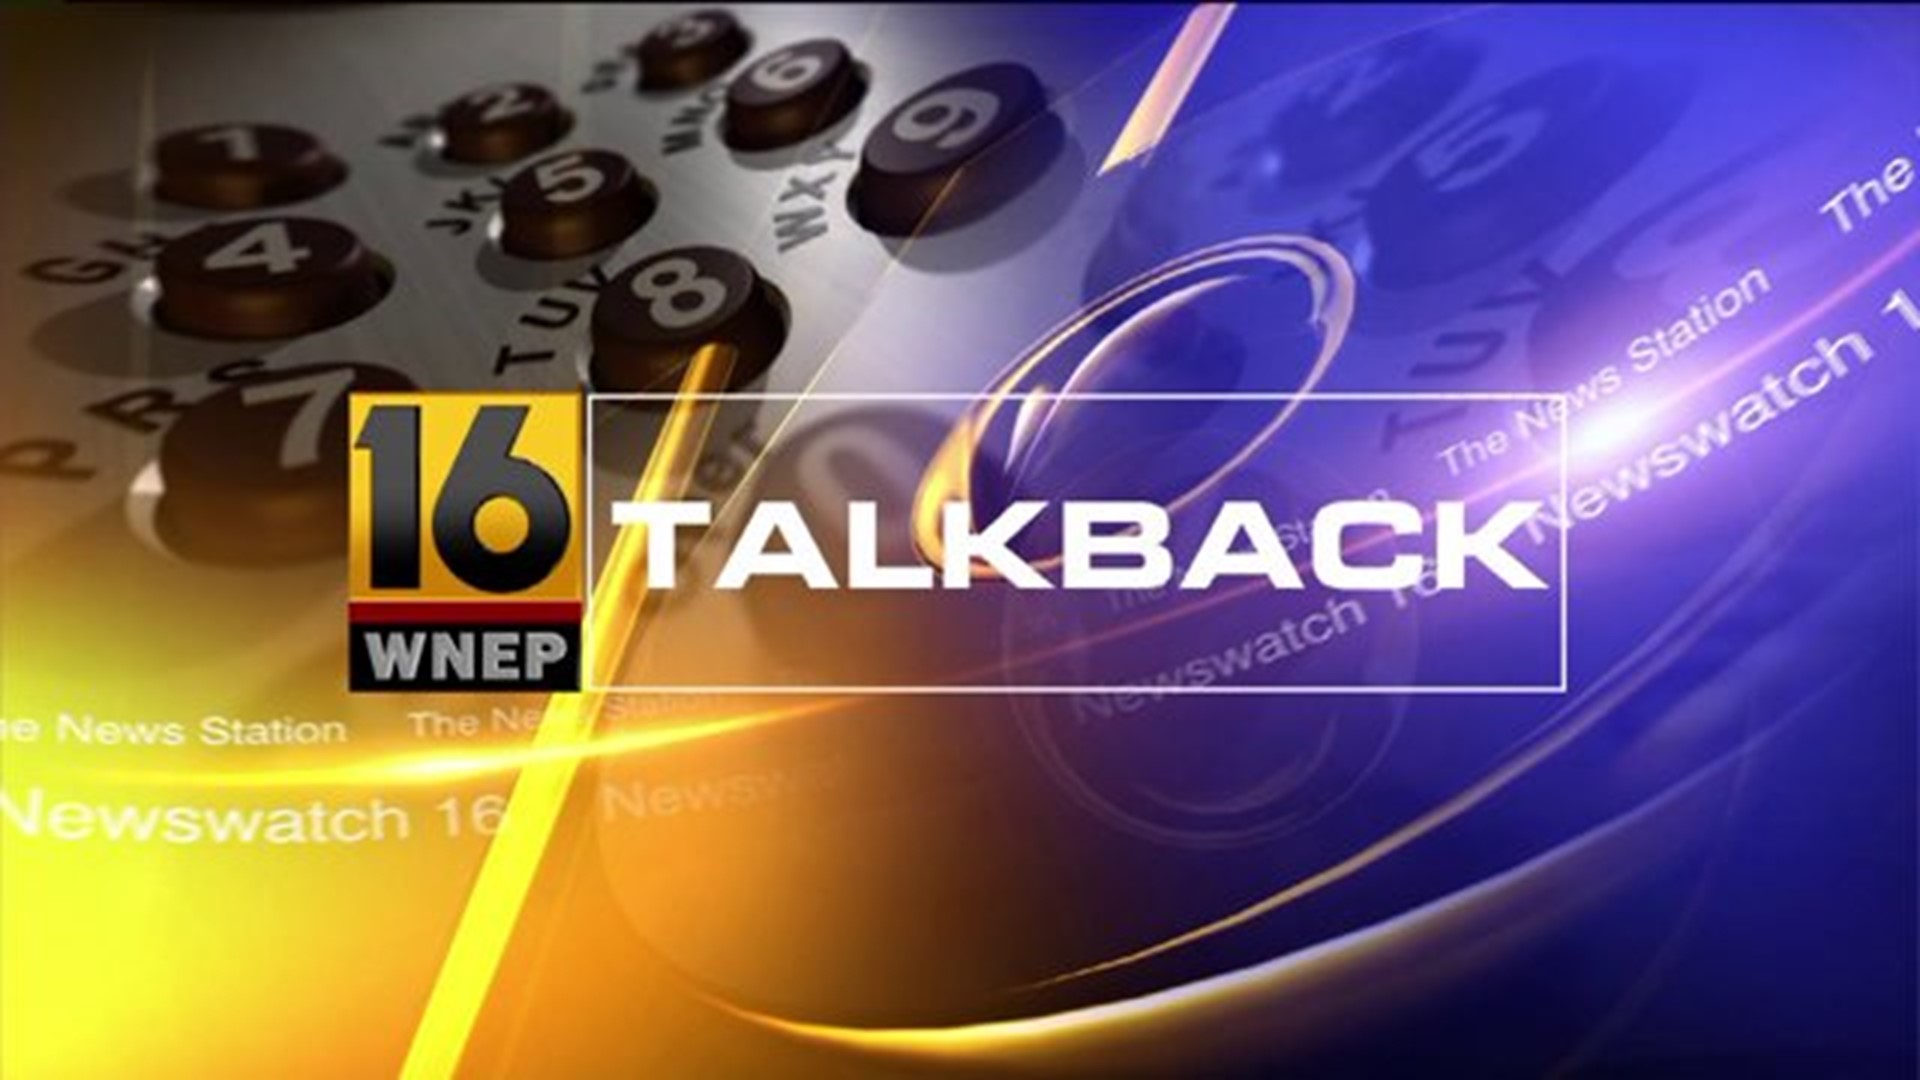 Talkback 16: Lawmaker Shoots at Robber, 10-Year-Old Accused Killer